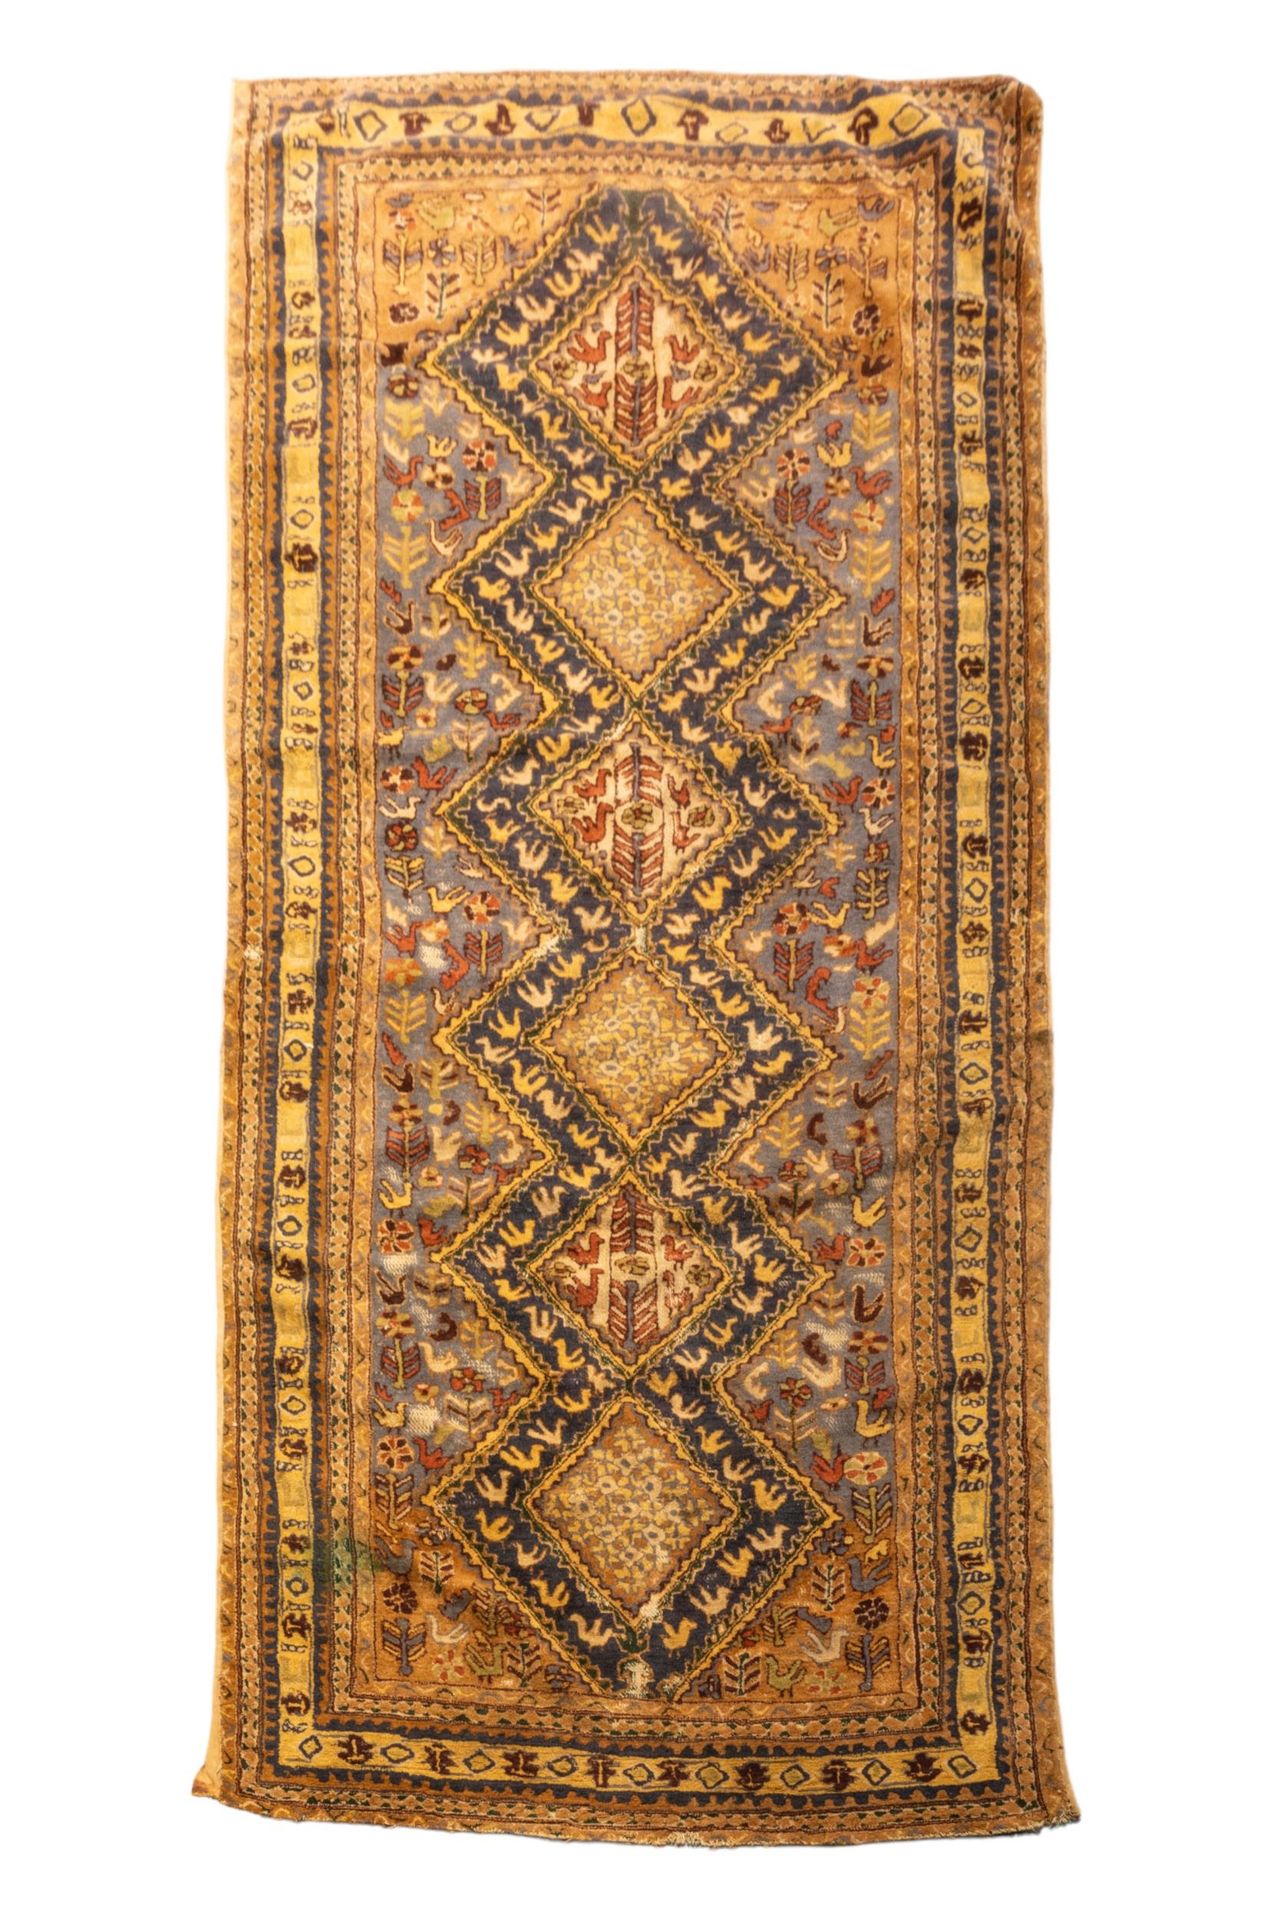 Null A HAND KNOTTED PERSIAN RUNNER, LATE 19TH/EARLY 20TH CENTURY, probably Hamad&hellip;